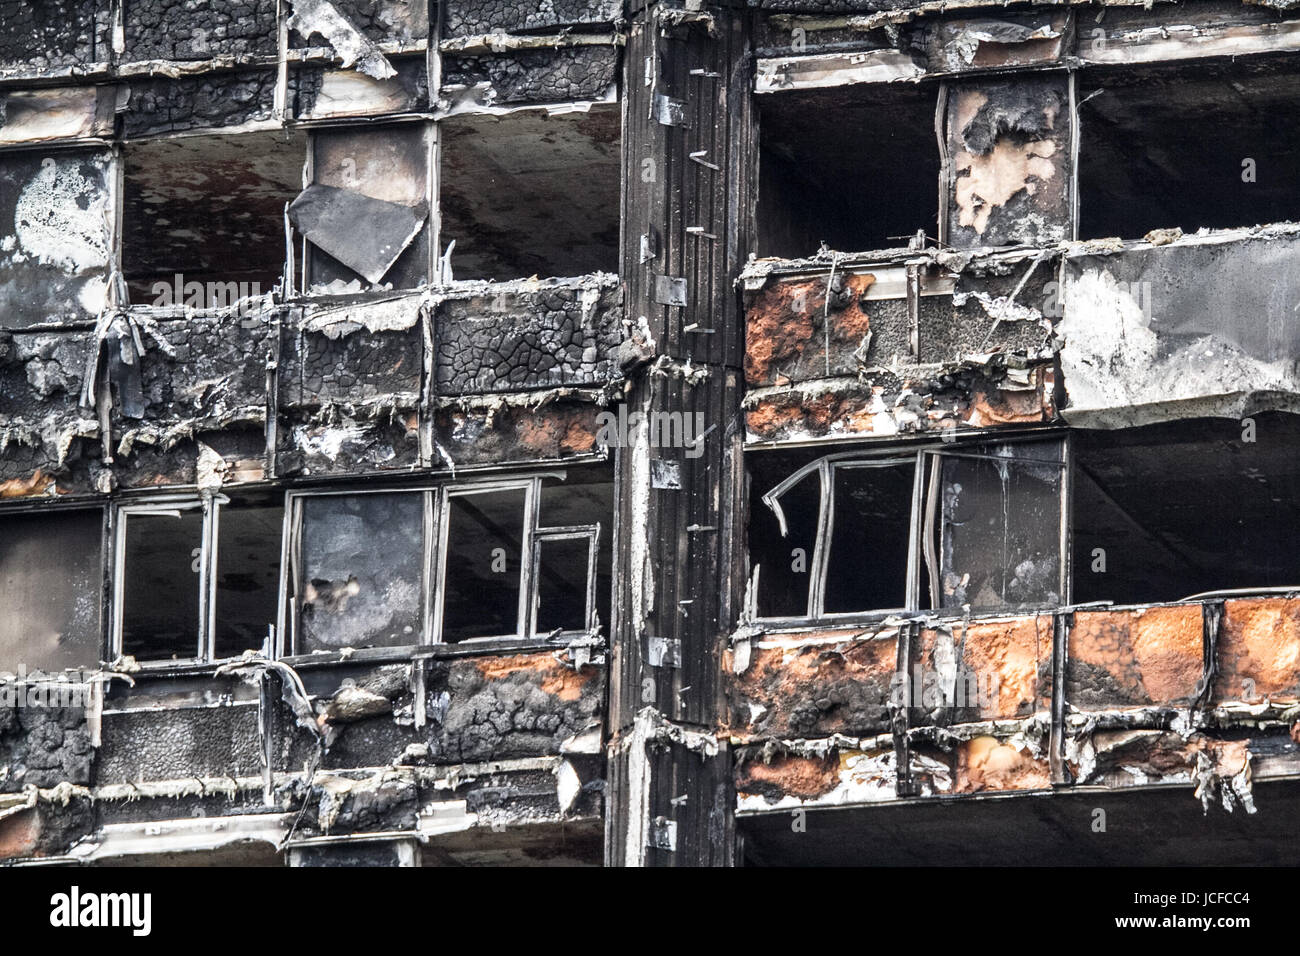 London, UK. 16th June, 2017. A close up of the the charred remains with melted cladding and blackened windows of the Grenfell residential tower block in Latimer road West London which was engulfed by a massive fire resulting in the deaths of 17 people and many still unaccounted for Credit: amer ghazzal/Alamy Live News Stock Photo